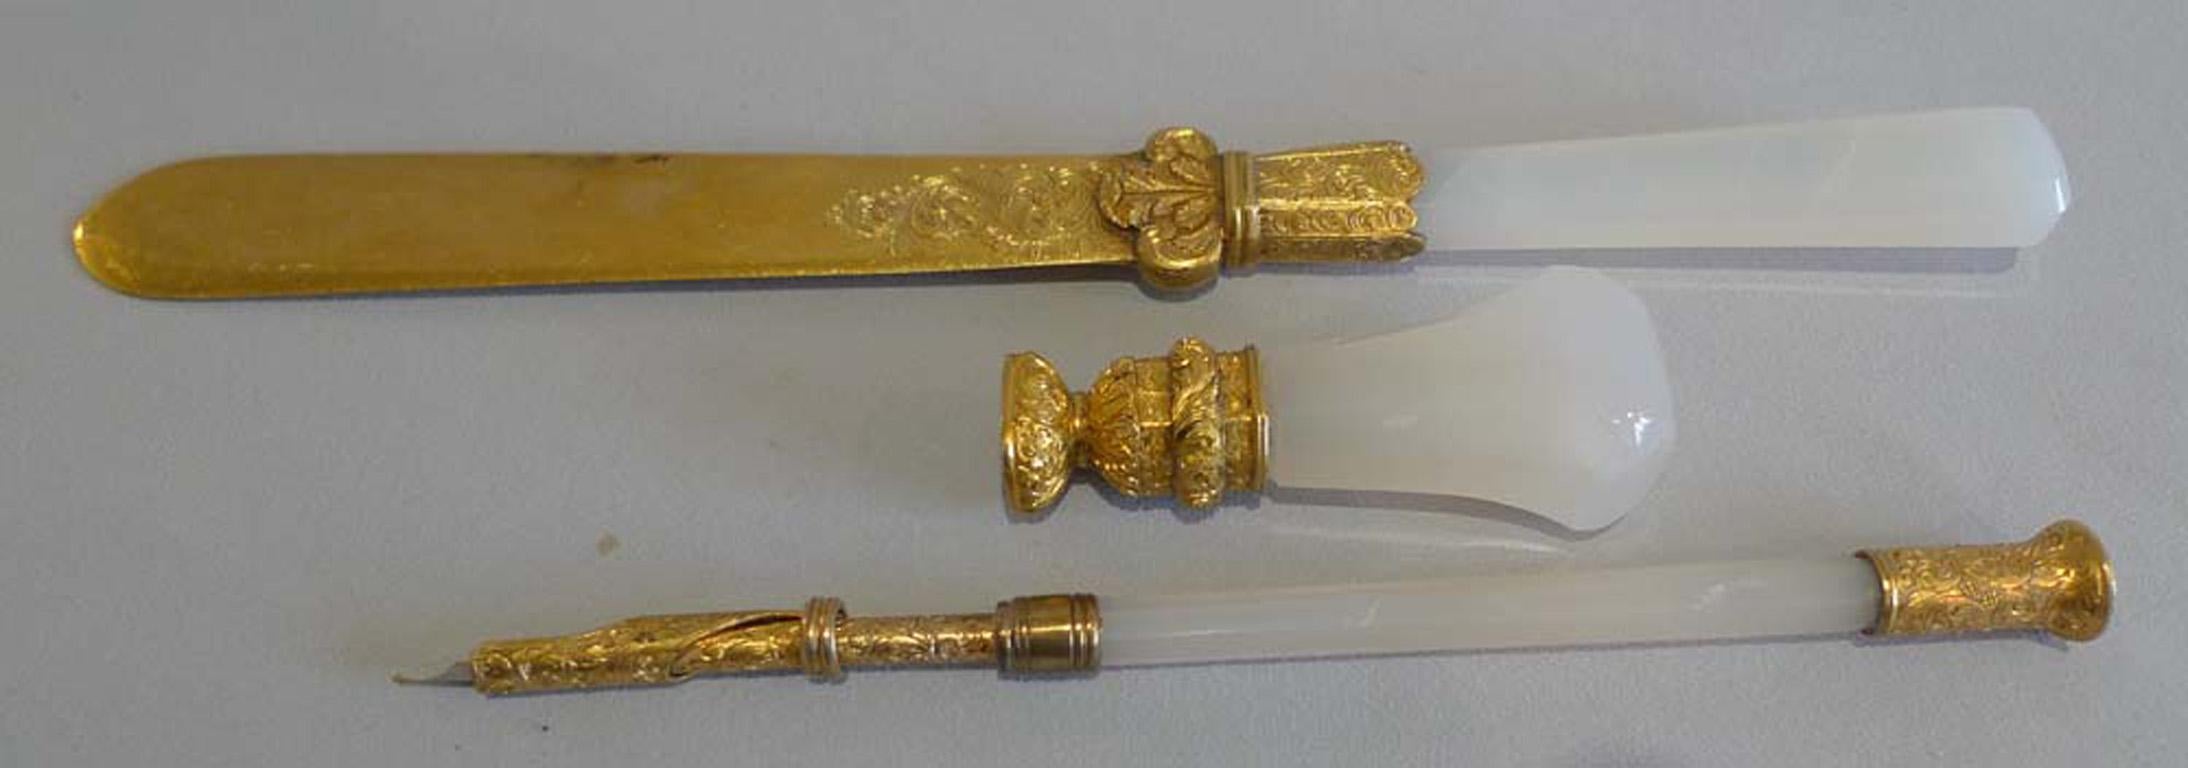 Gilt Chalcedony and Gilded Bronze Desk Set from the Duke of St. Albans For Sale